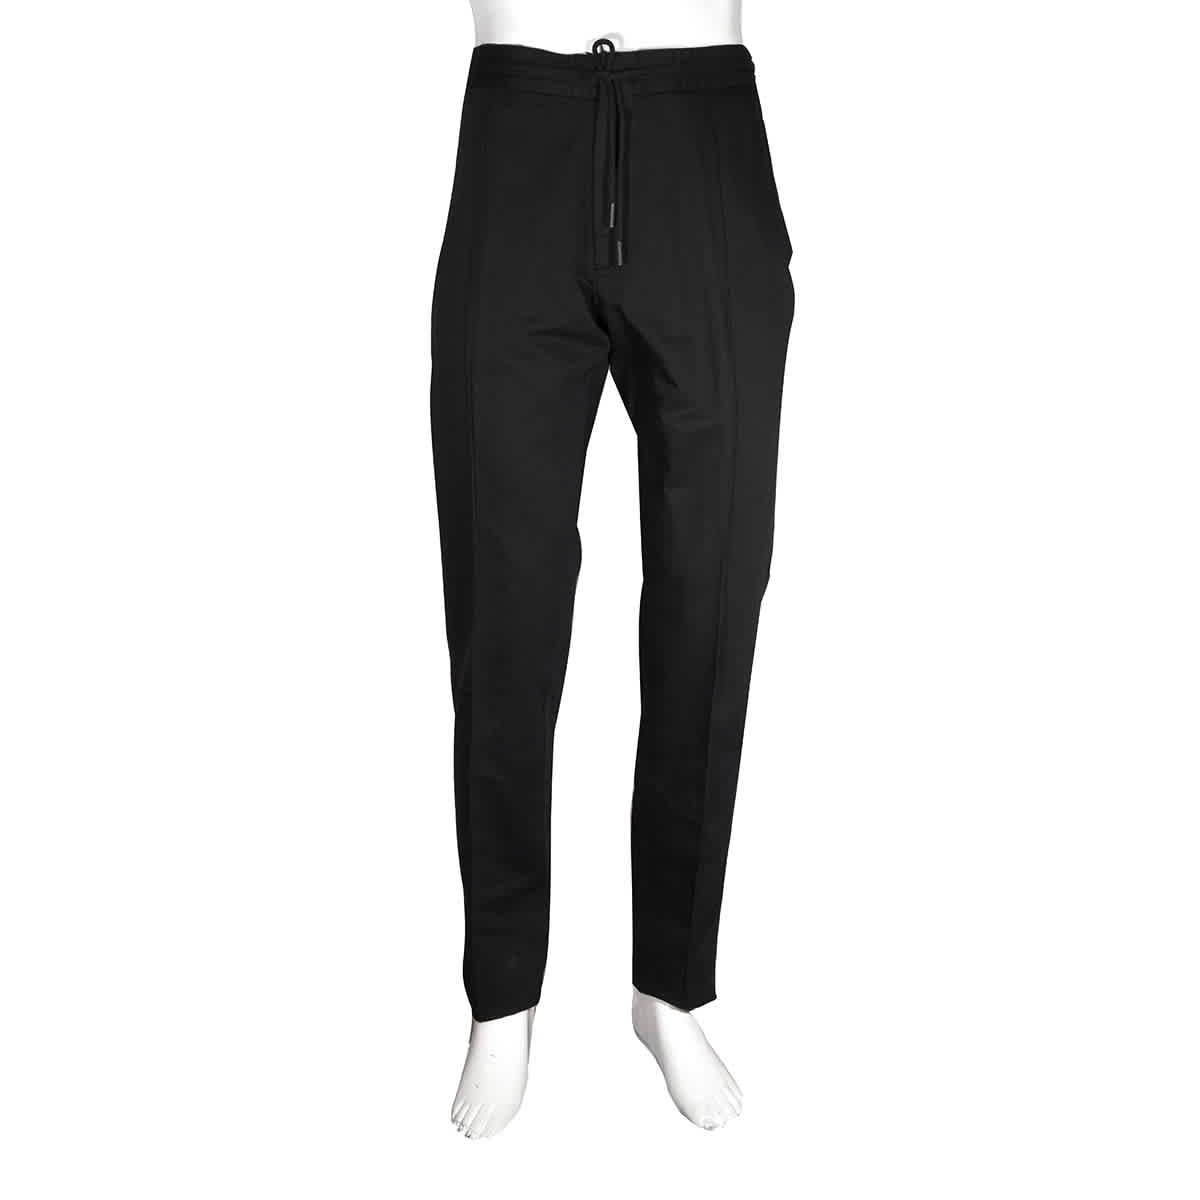 Proenza Schouler Synthetic Slit Stretch leggings in Blue Slacks and Chinos Leggings Womens Clothing Trousers 